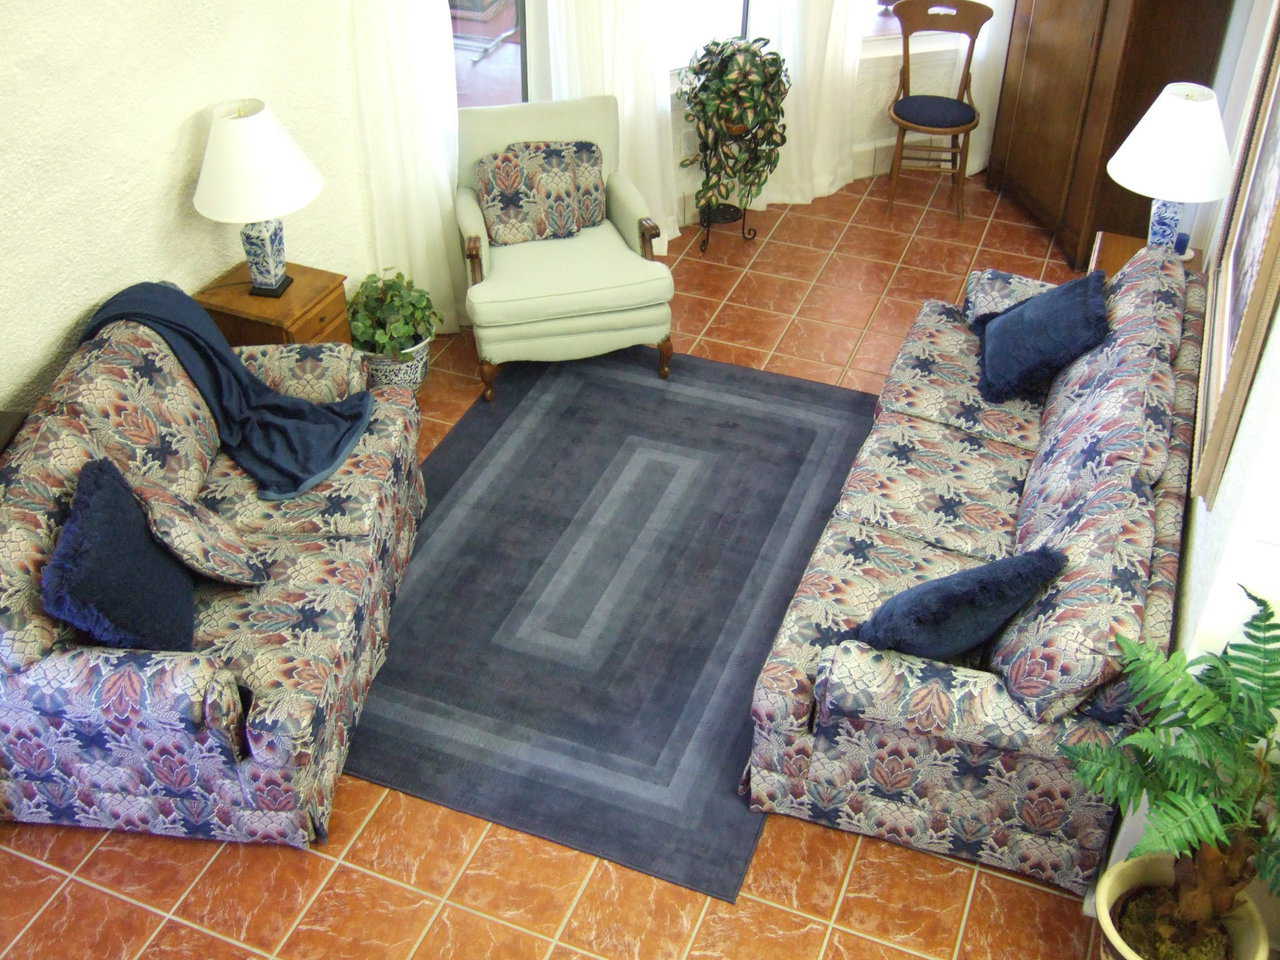 Let’s talk! — Charca Casa’s great room has several convenient and comfortable conversation areas.